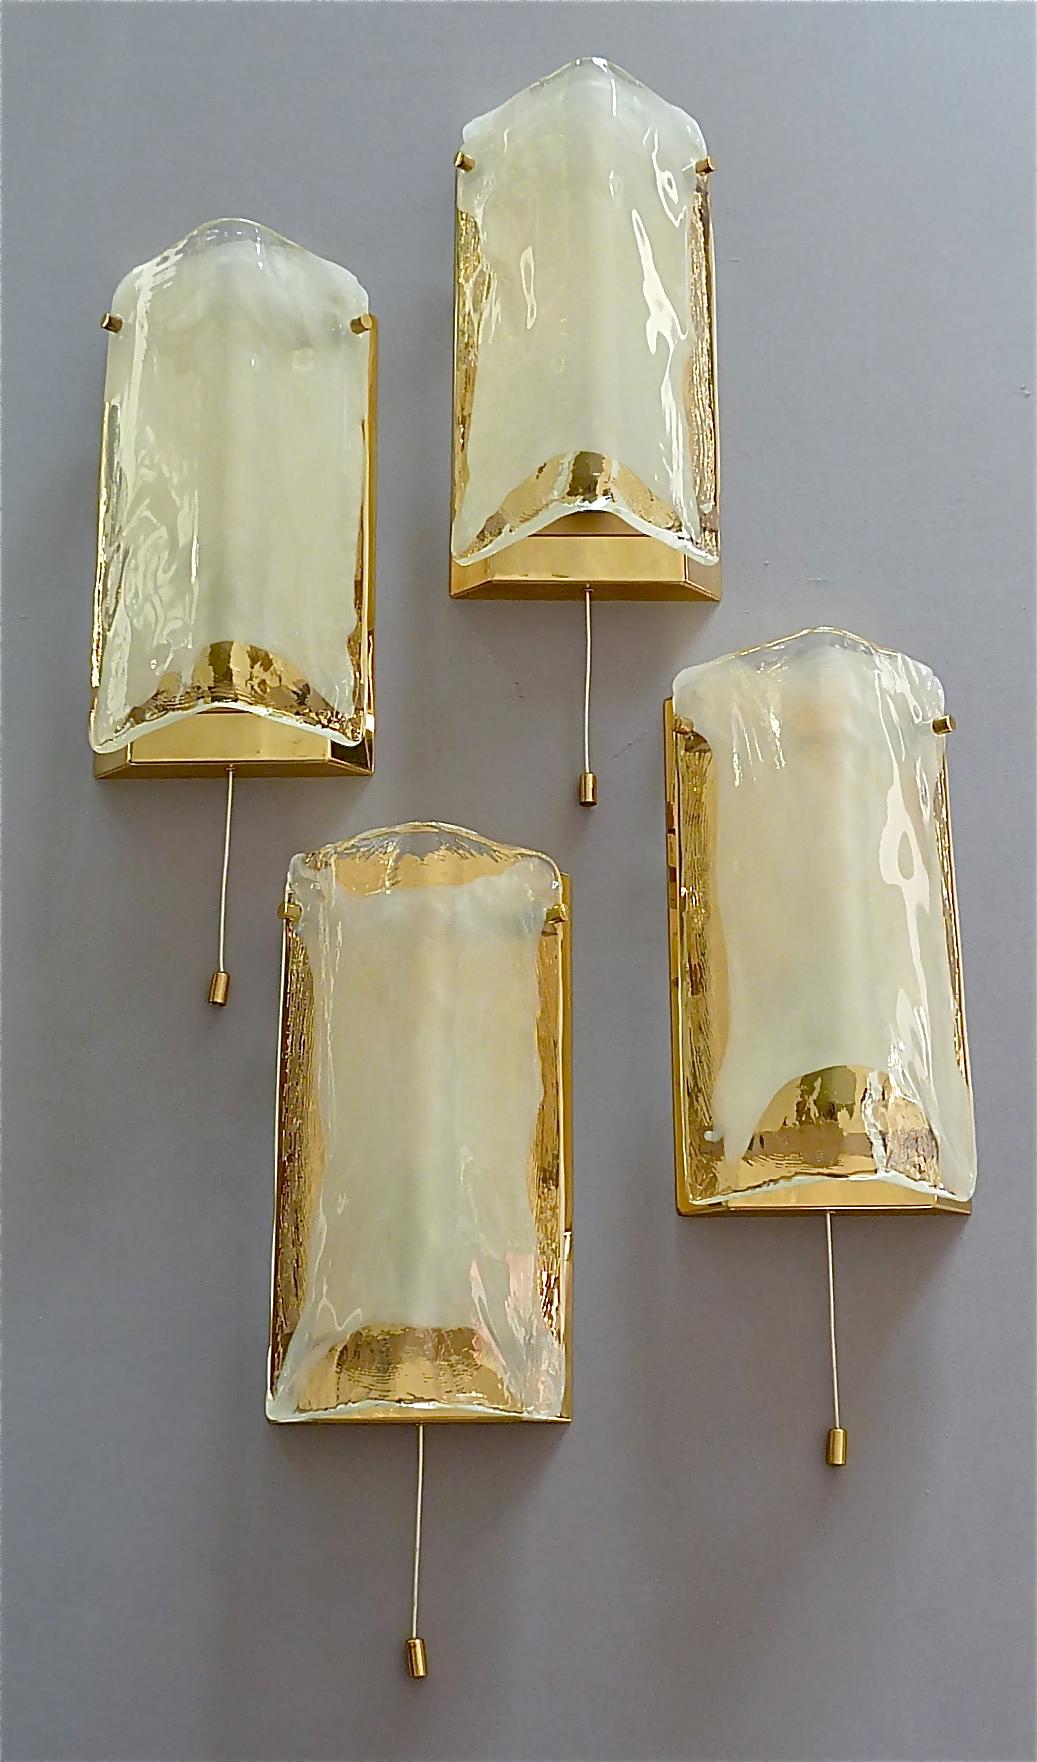 A beautiful pair of wall lights or sconces by J.T. Kalmar, Austria, circa 1960-1970, made of brass and crystal glass. The modern and stylish model is typical for Kalmar, highest quality and best materials. The sconces have a partly patinated brass